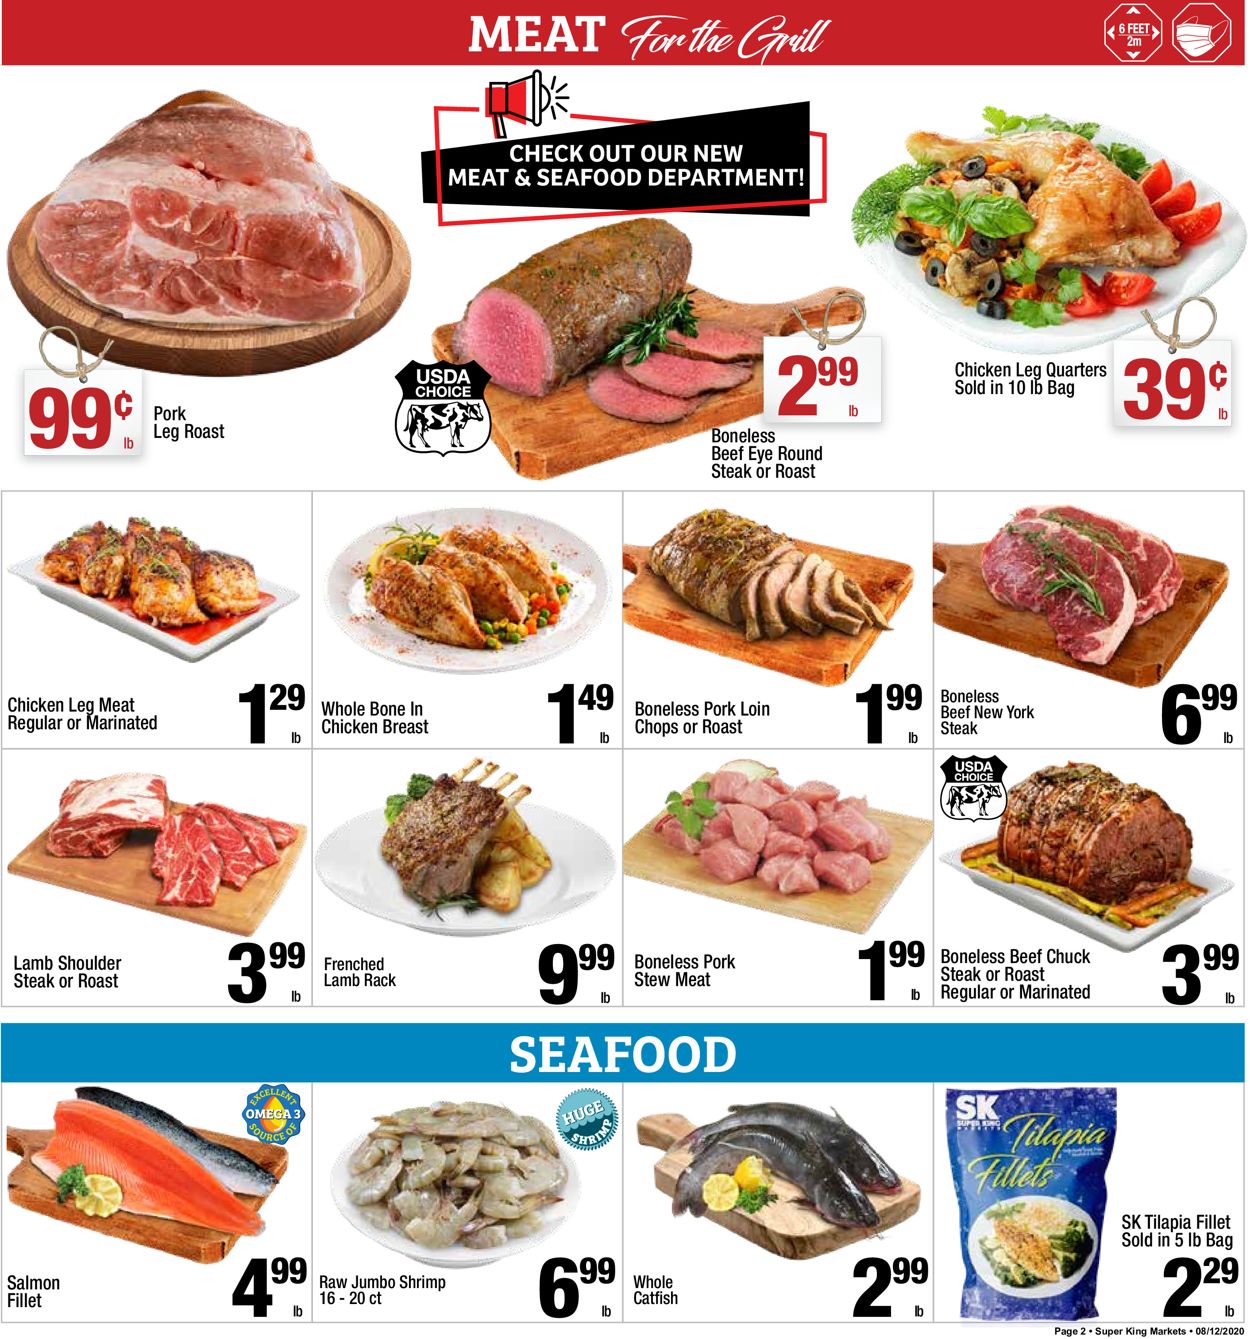 Catalogue Super King Market from 08/12/2020